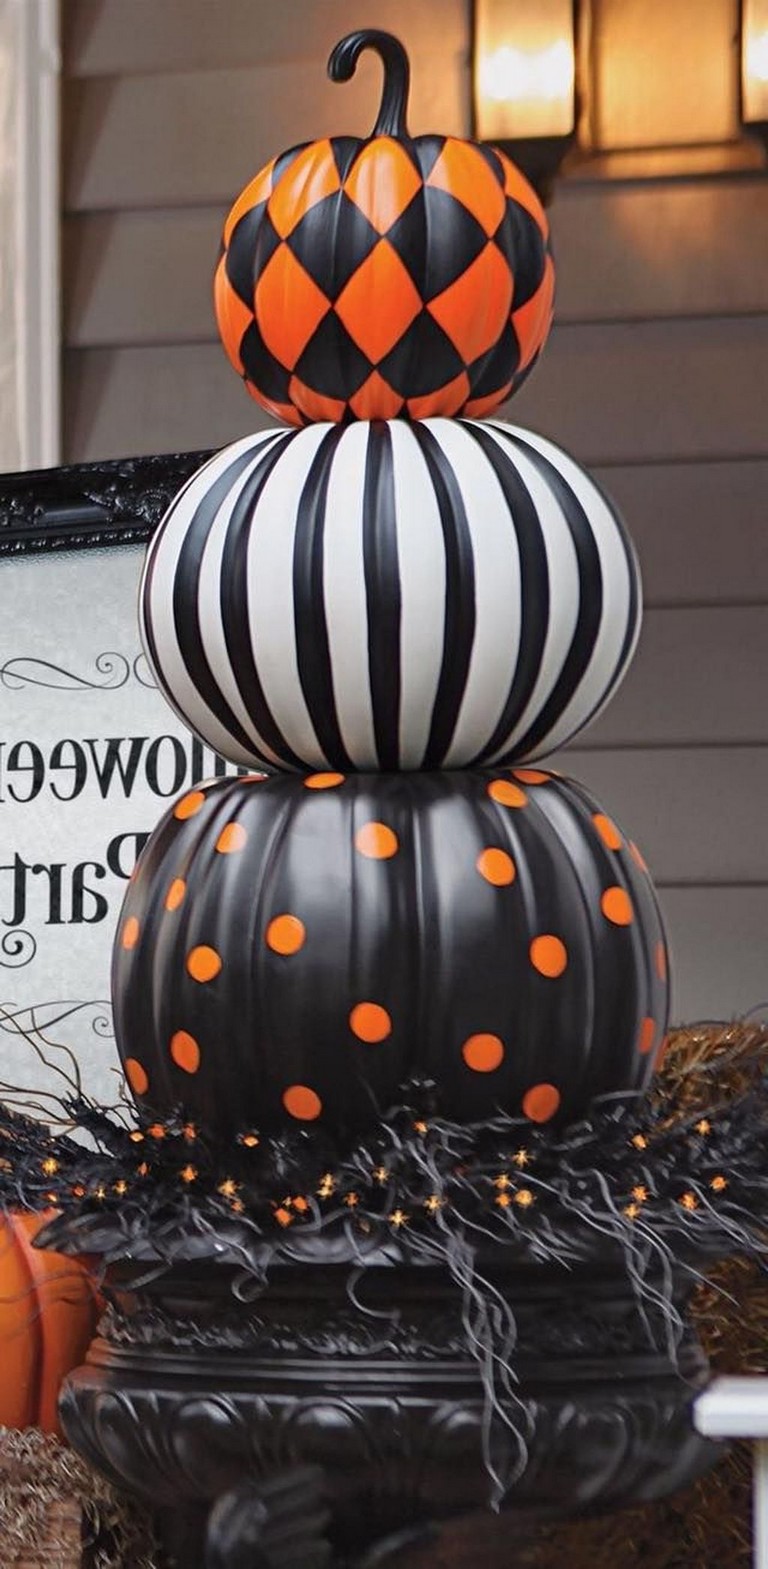 28+ Exciting Homemade Halloween Home Decoration Ideas - Page 28 of 30